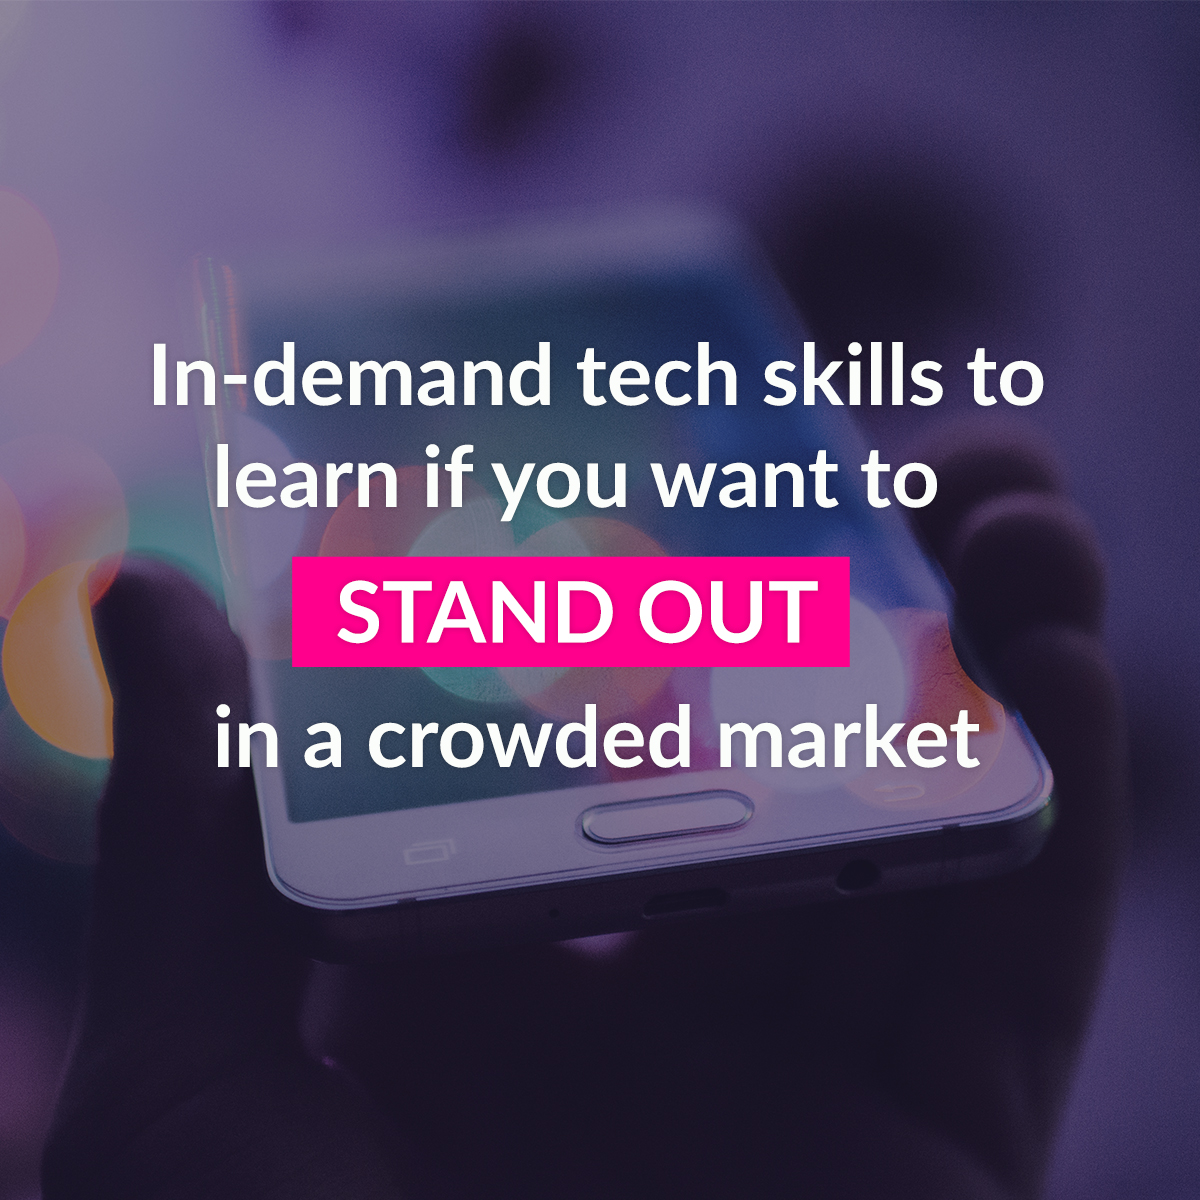 In-demand tech skills to stand out